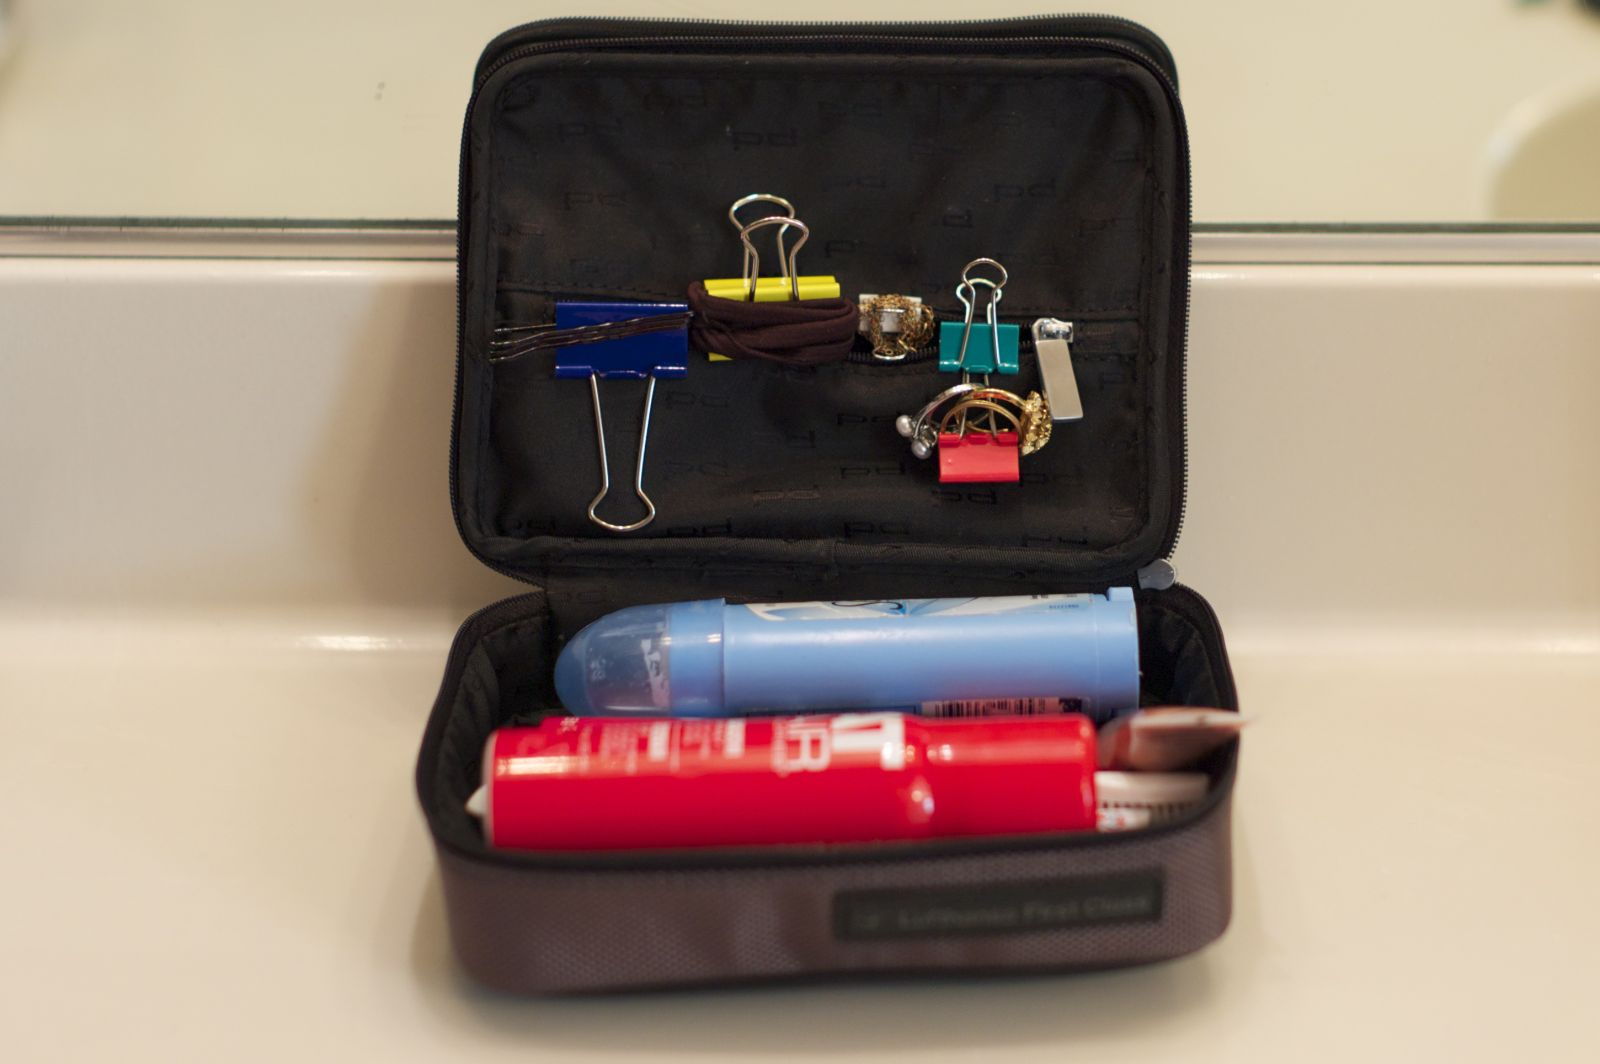 Attach binder clips to the inside of a travel bag to organize your accessories while travelling